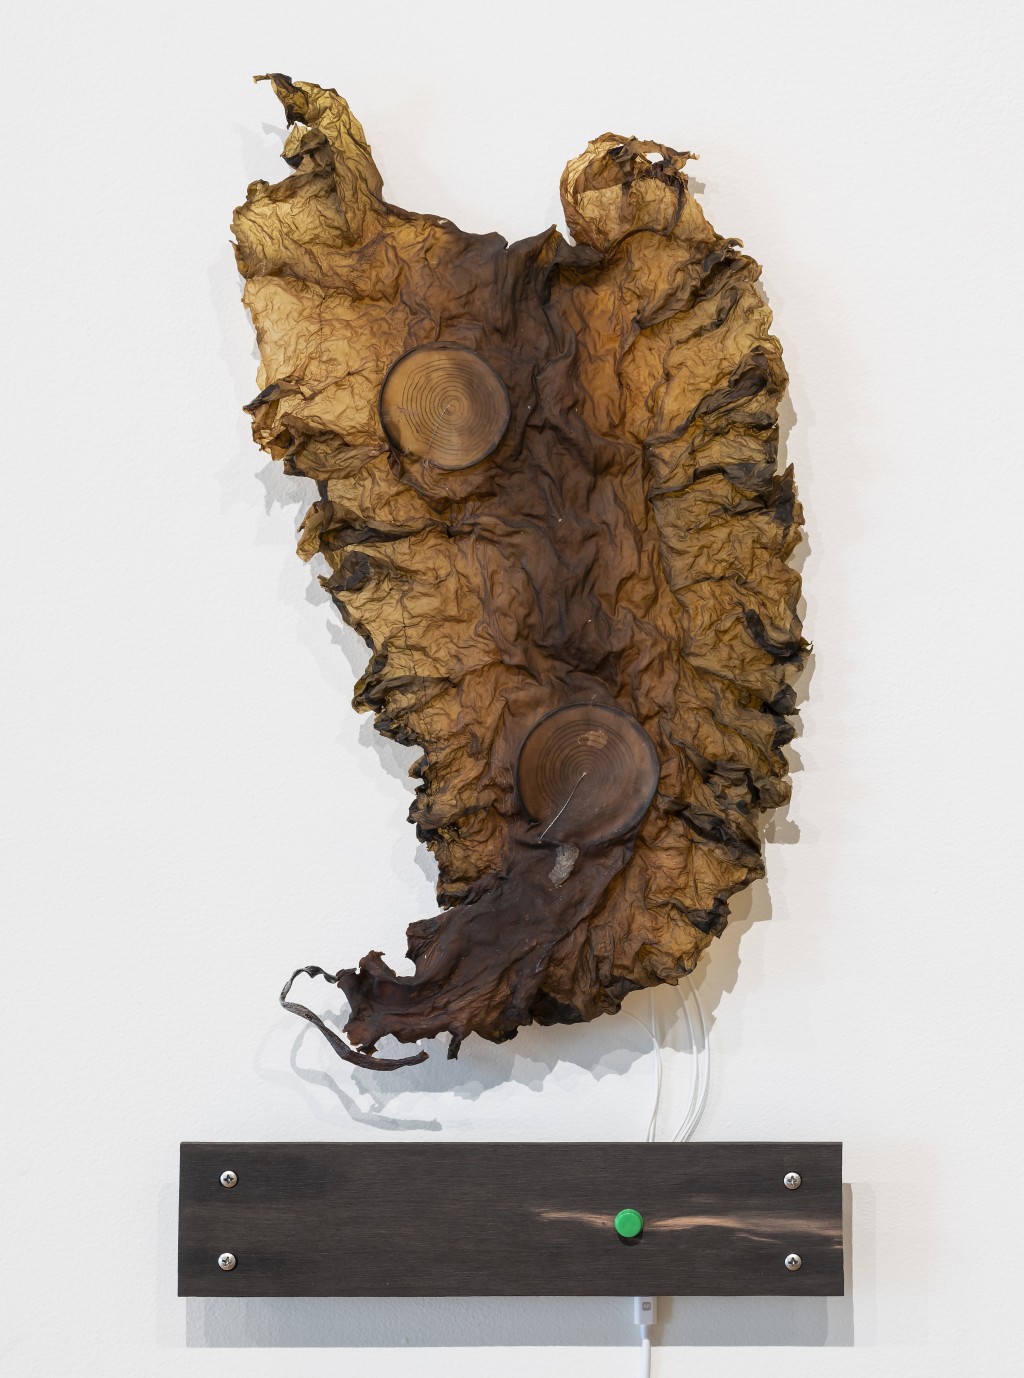 A piece of seaweed has been turned into an art display